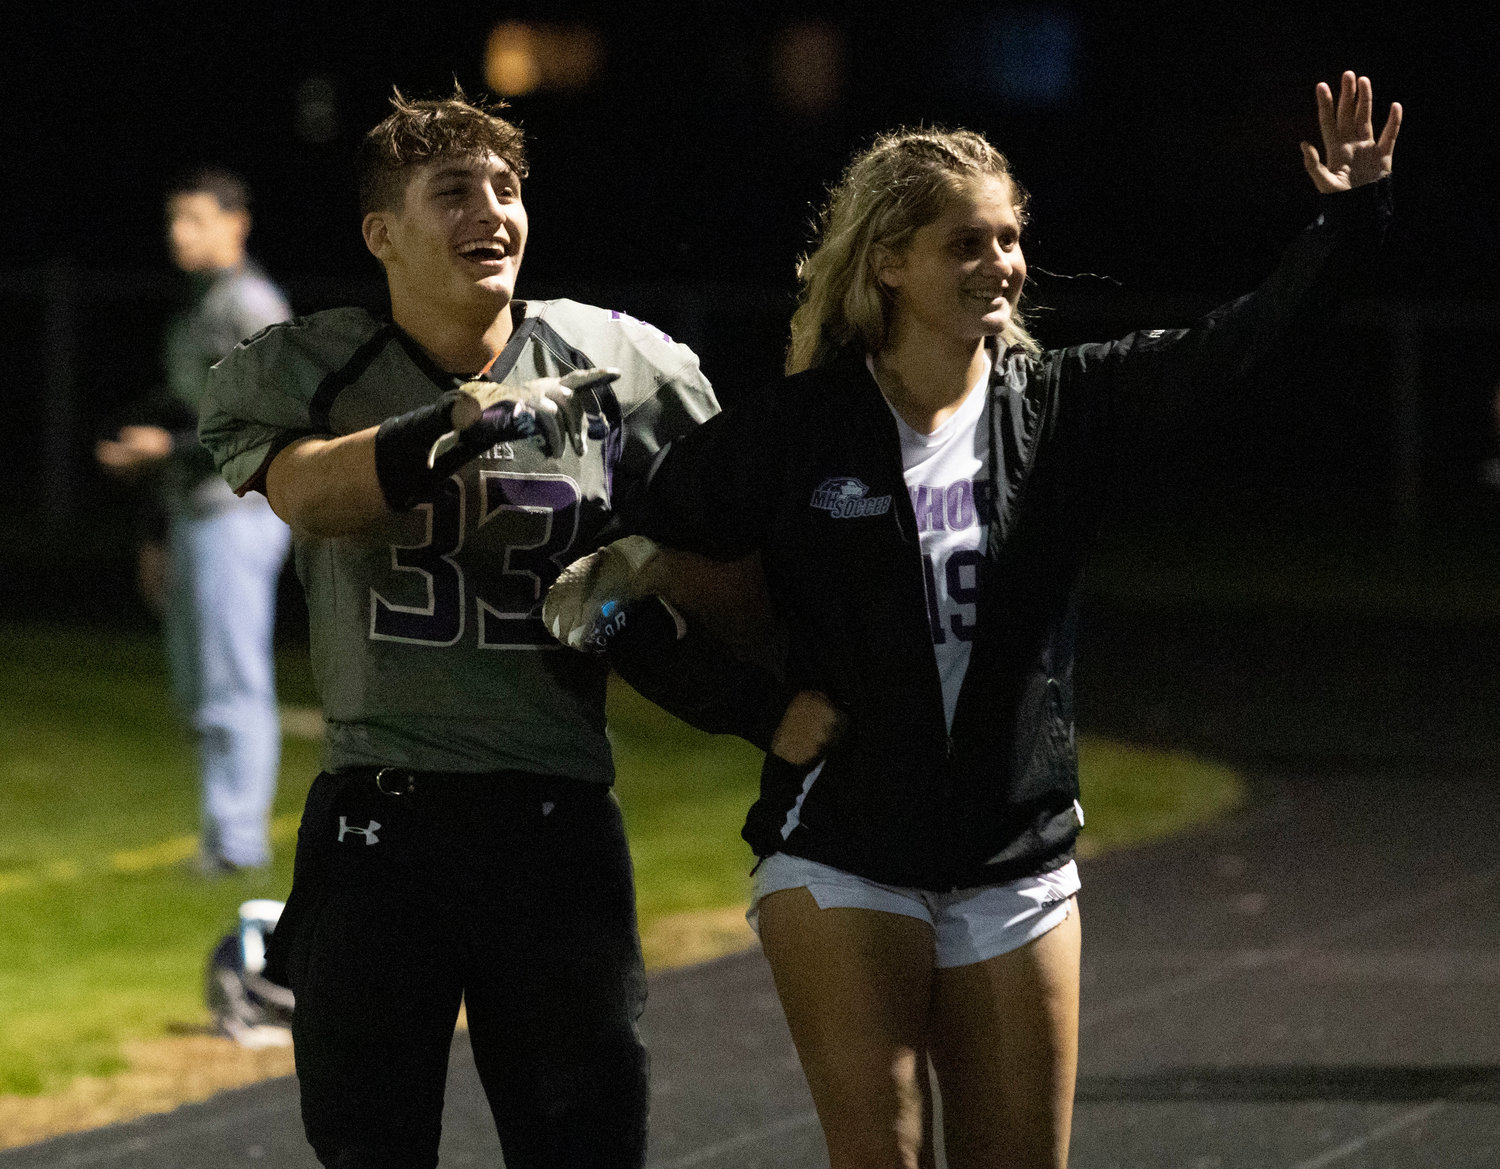 Brock Pacheco and soccer player Abby Razzino are announced to the crowd during the Homecoming game.